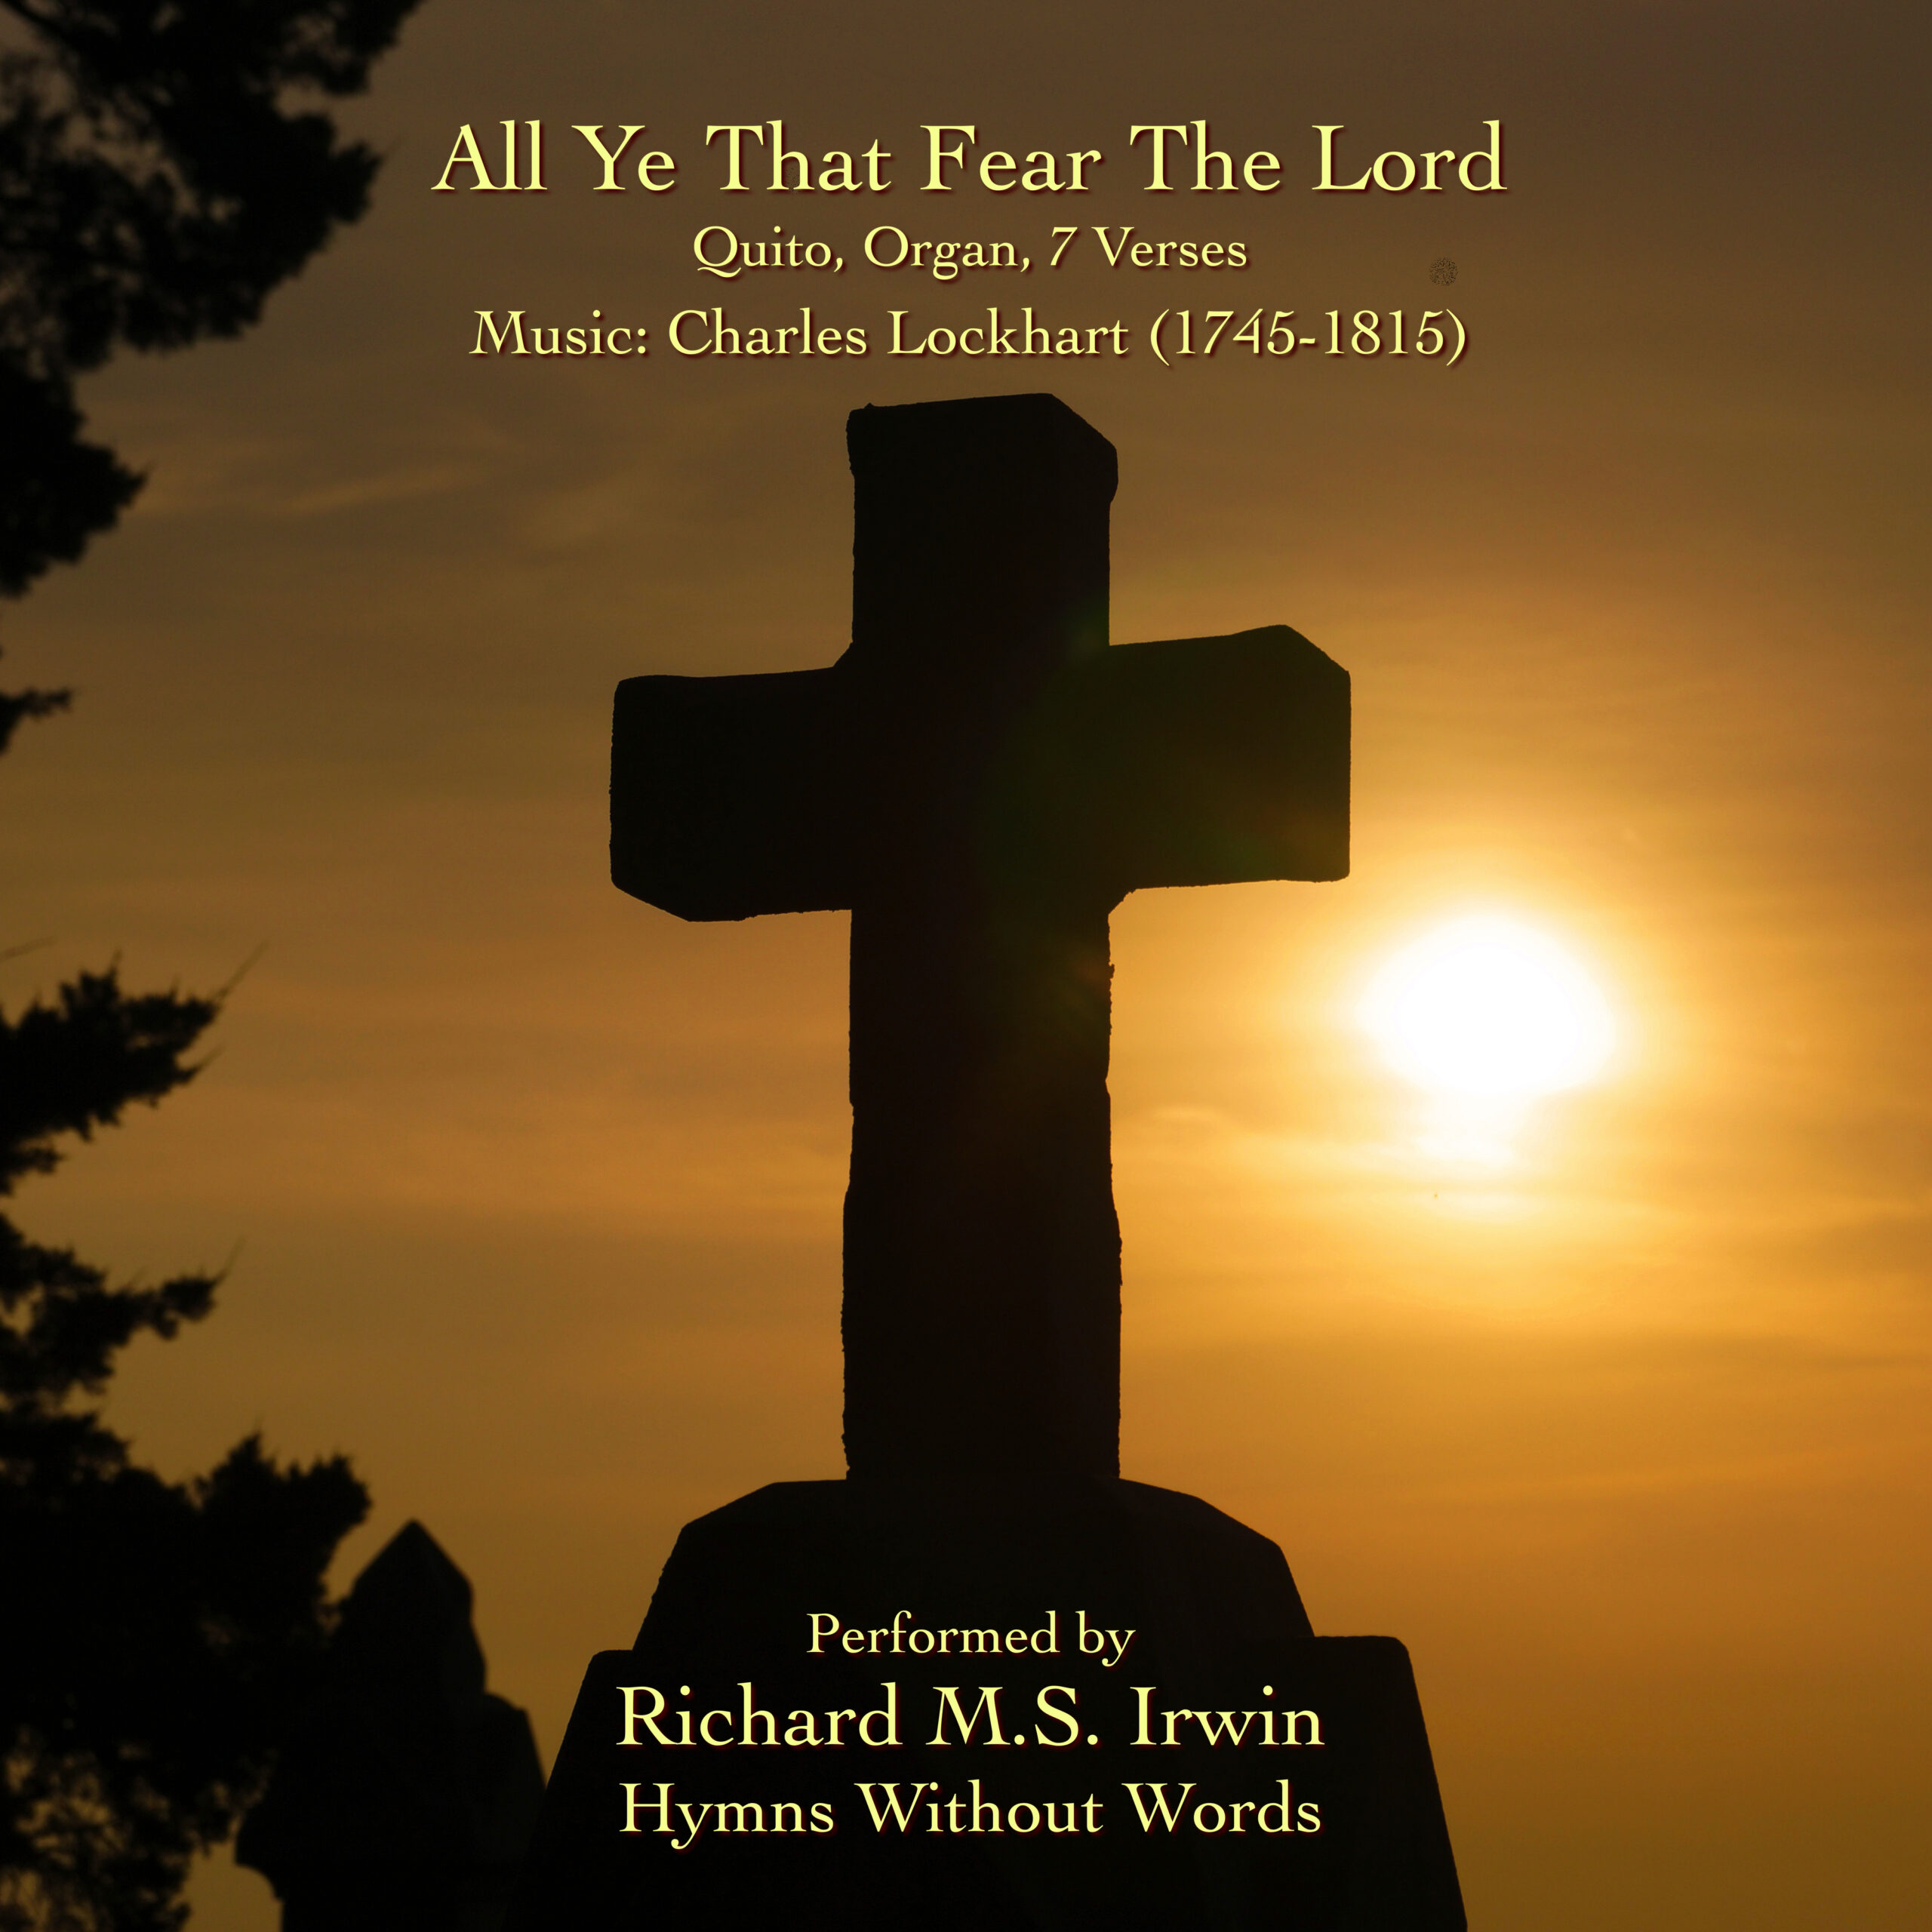 All Ye That Fear The Lord